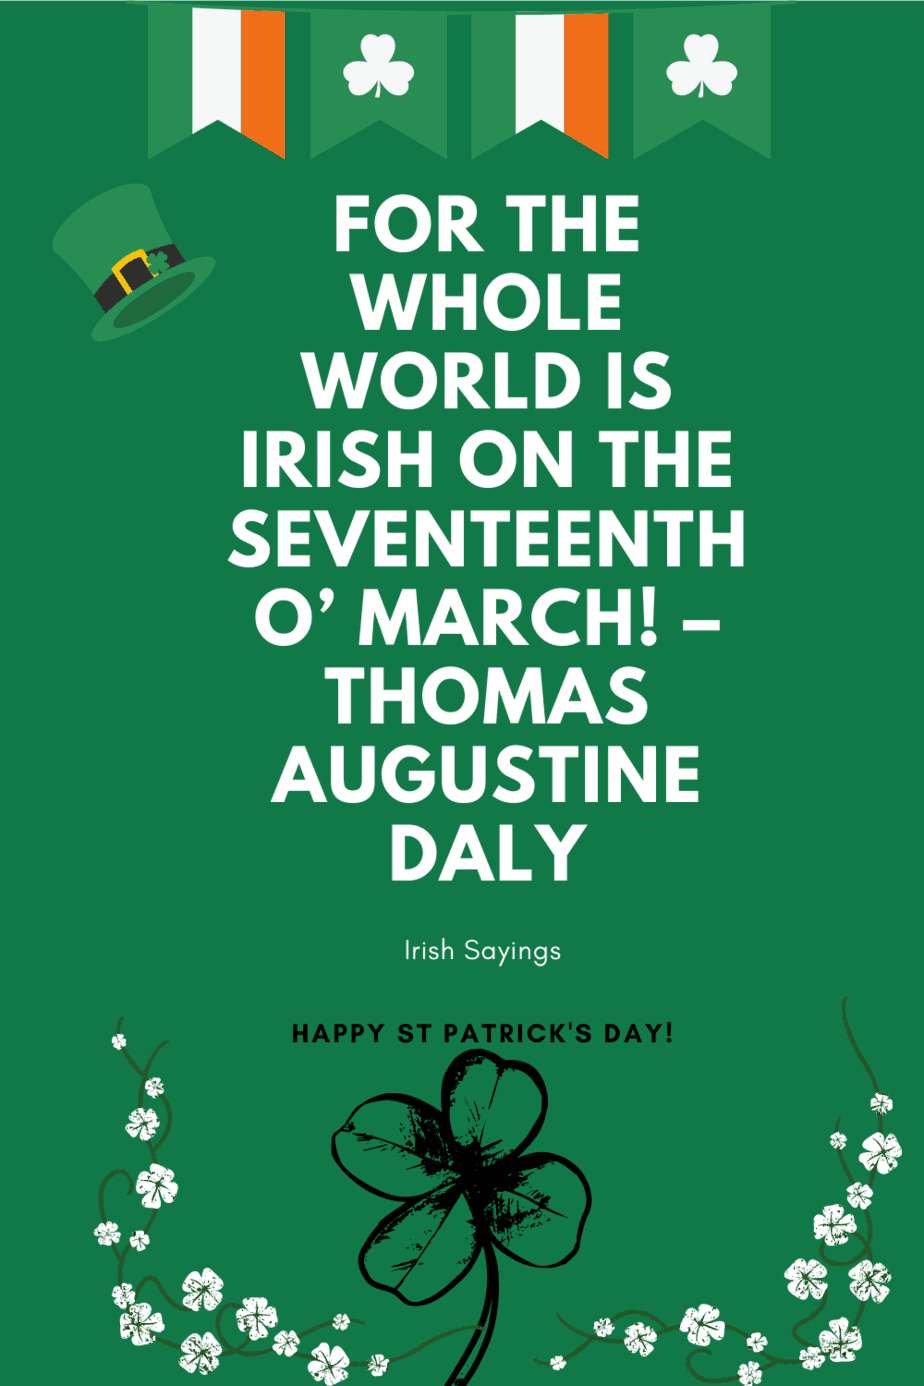 For the whole world is Irish on the seventeenth o’ March! –Thomas Augustine Daly St Patricks day 